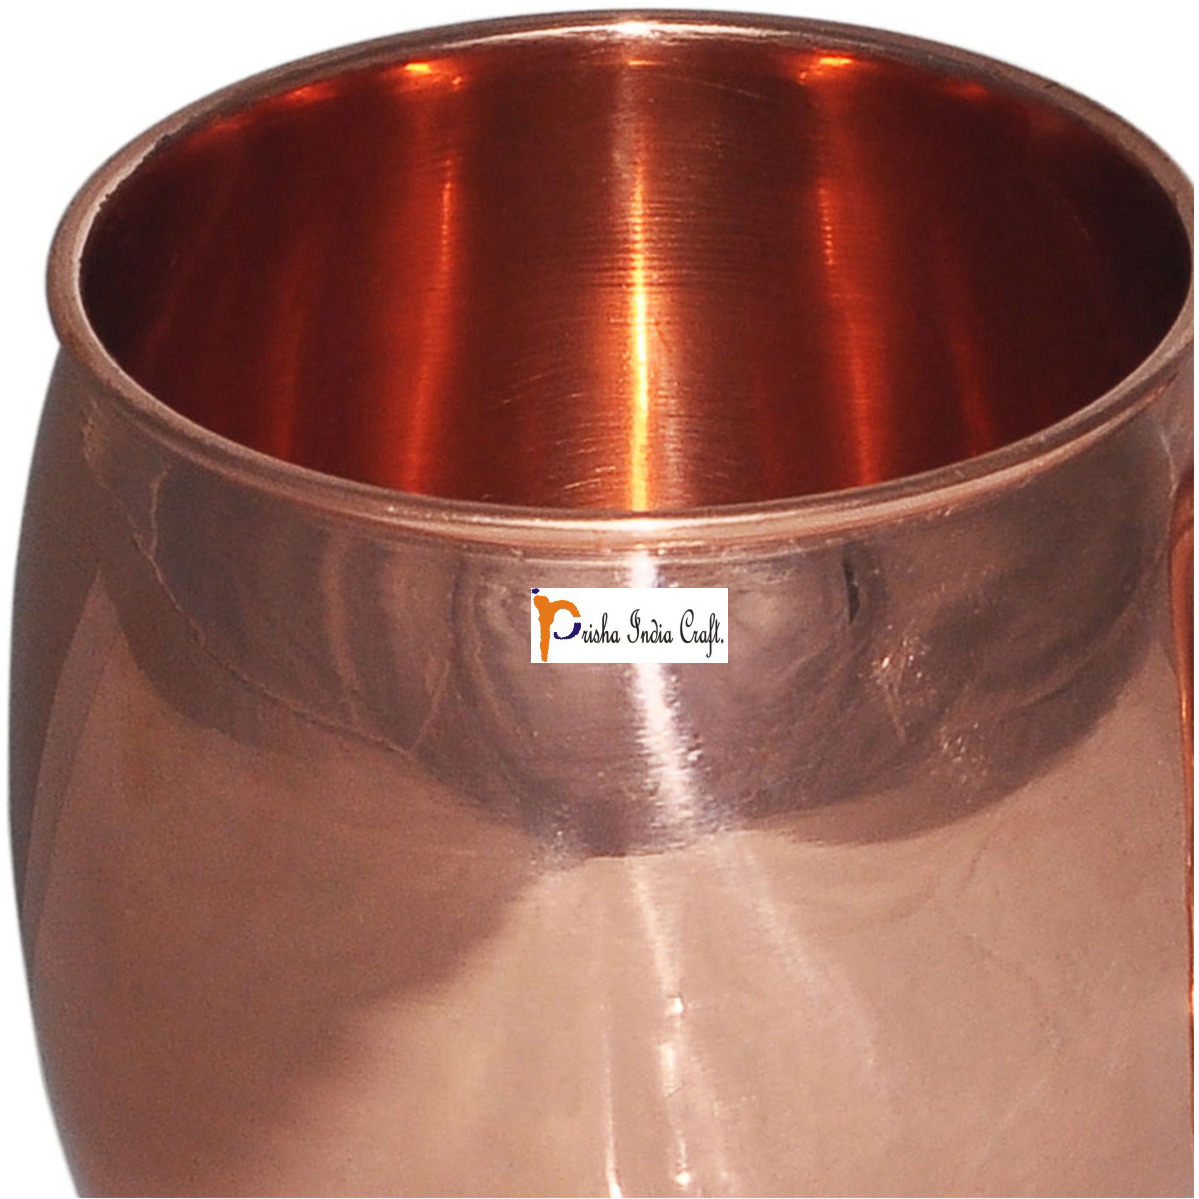 Set of 8 - Prisha India Craft B. Copper Barrel Mug Classic for Moscow Mule 520 ML / 17 oz Pure Copper Mug, Copper Mule Cup, Moscow Mule Cocktail Cup, Copper Mugs, Cocktail Mugs - with No Inner Linings